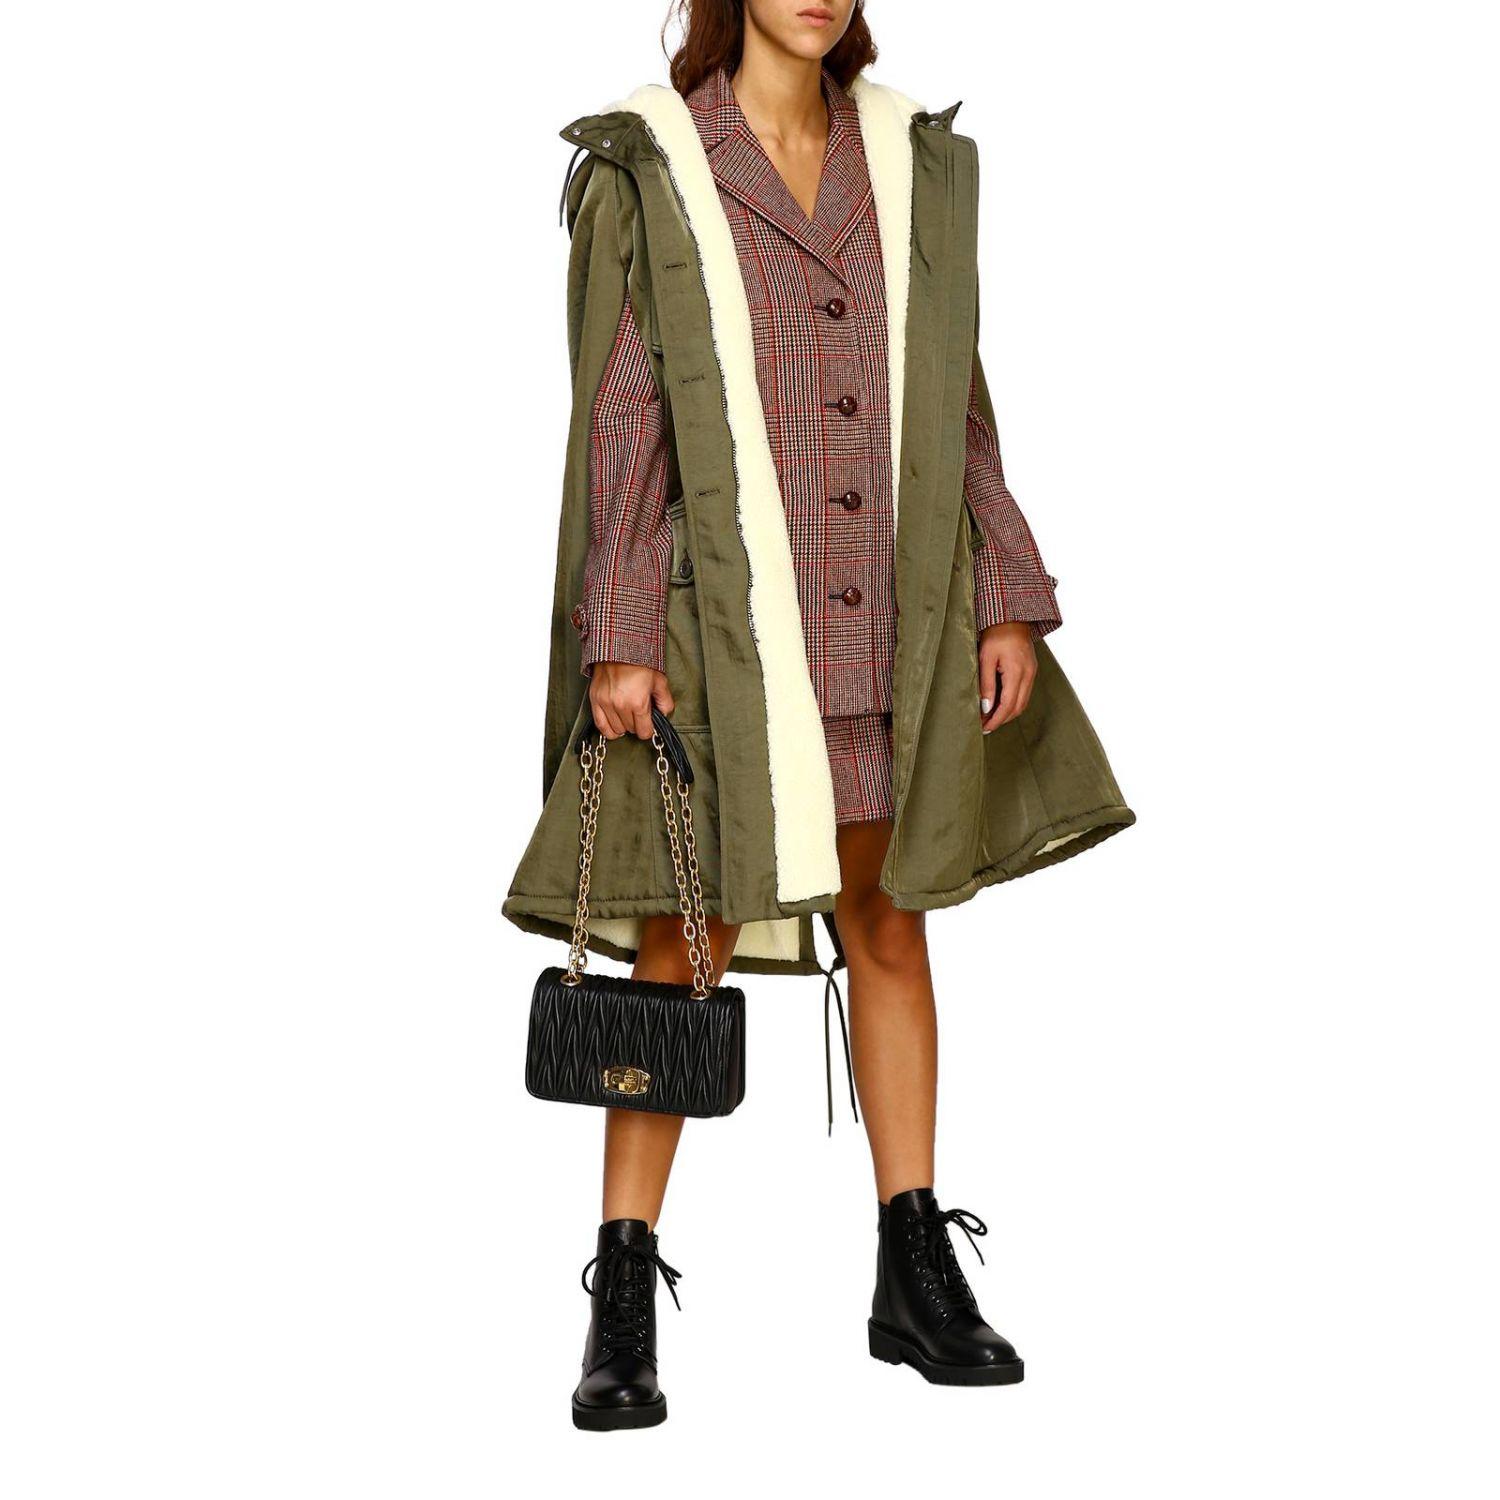 Miu Miu Cape With Hood And Teddy Bear Interior in Military (Green) - Lyst